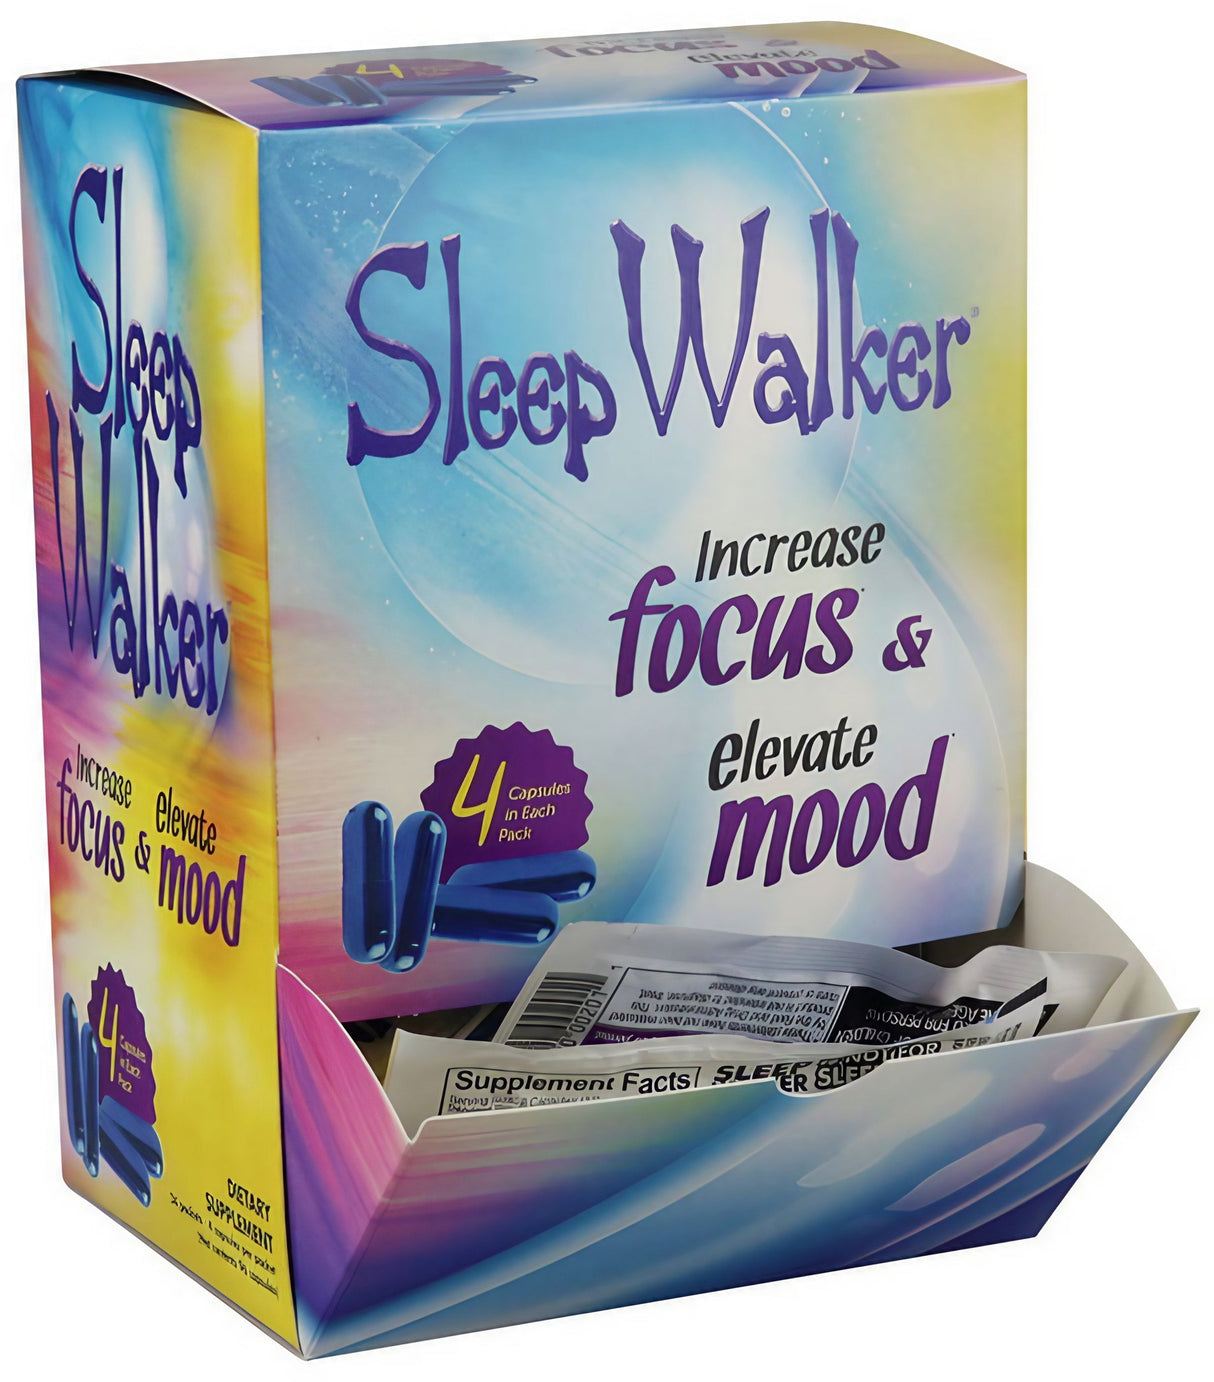 Red Dawn Sleep Walker 4-pack pills in a 12pc display box, designed for focus & mood elevation